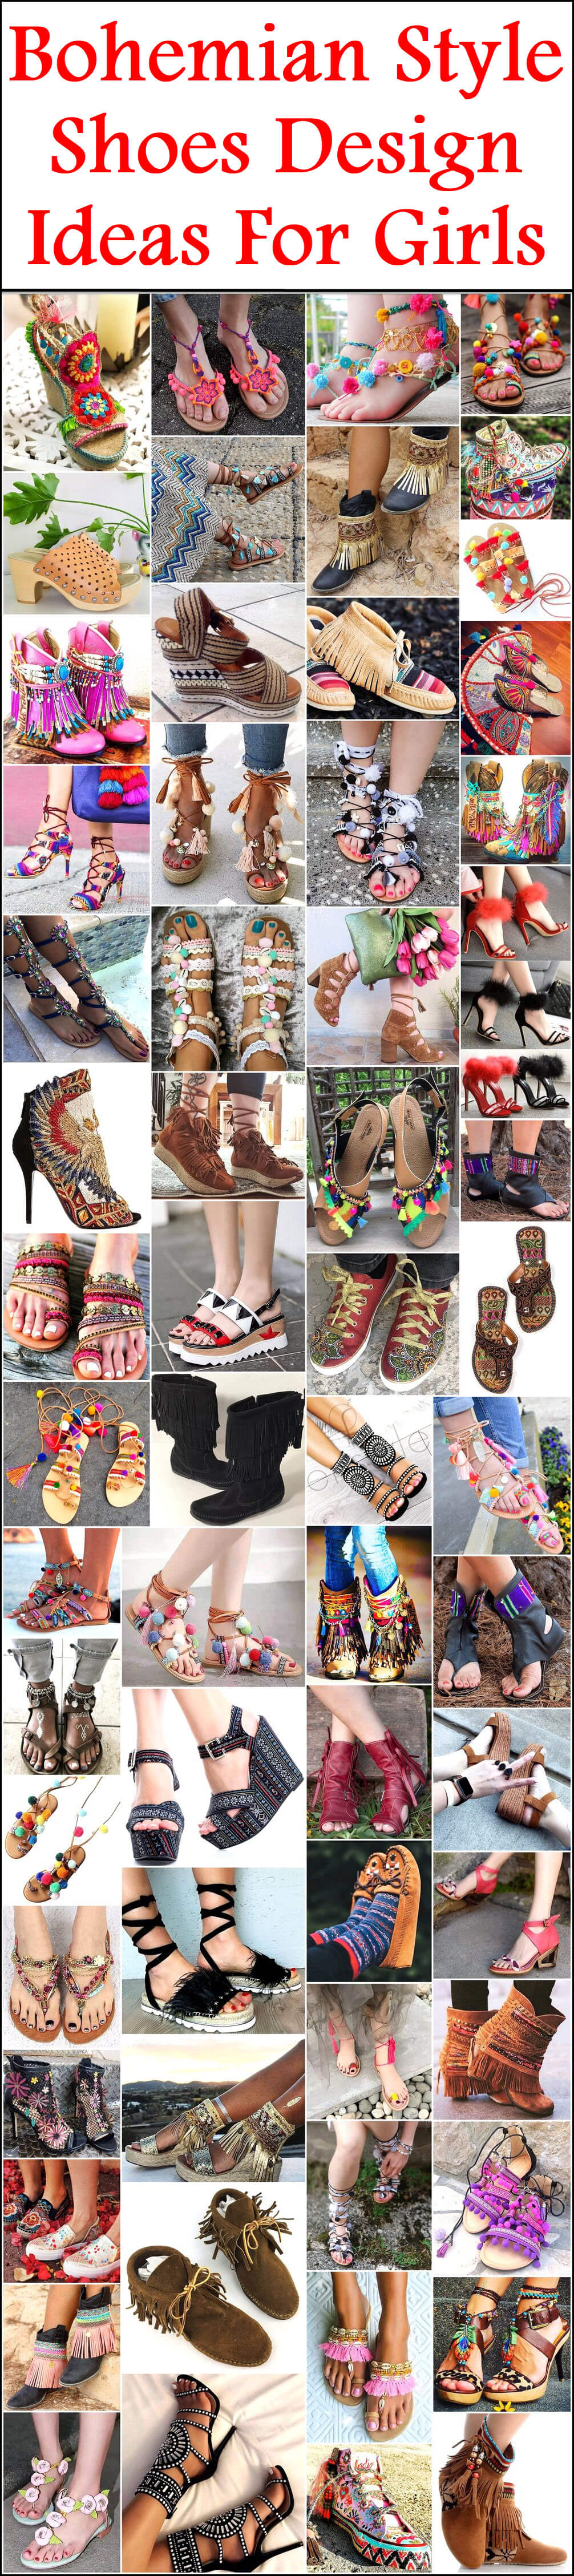 Bohemian Style Shoes Design Ideas For Girls